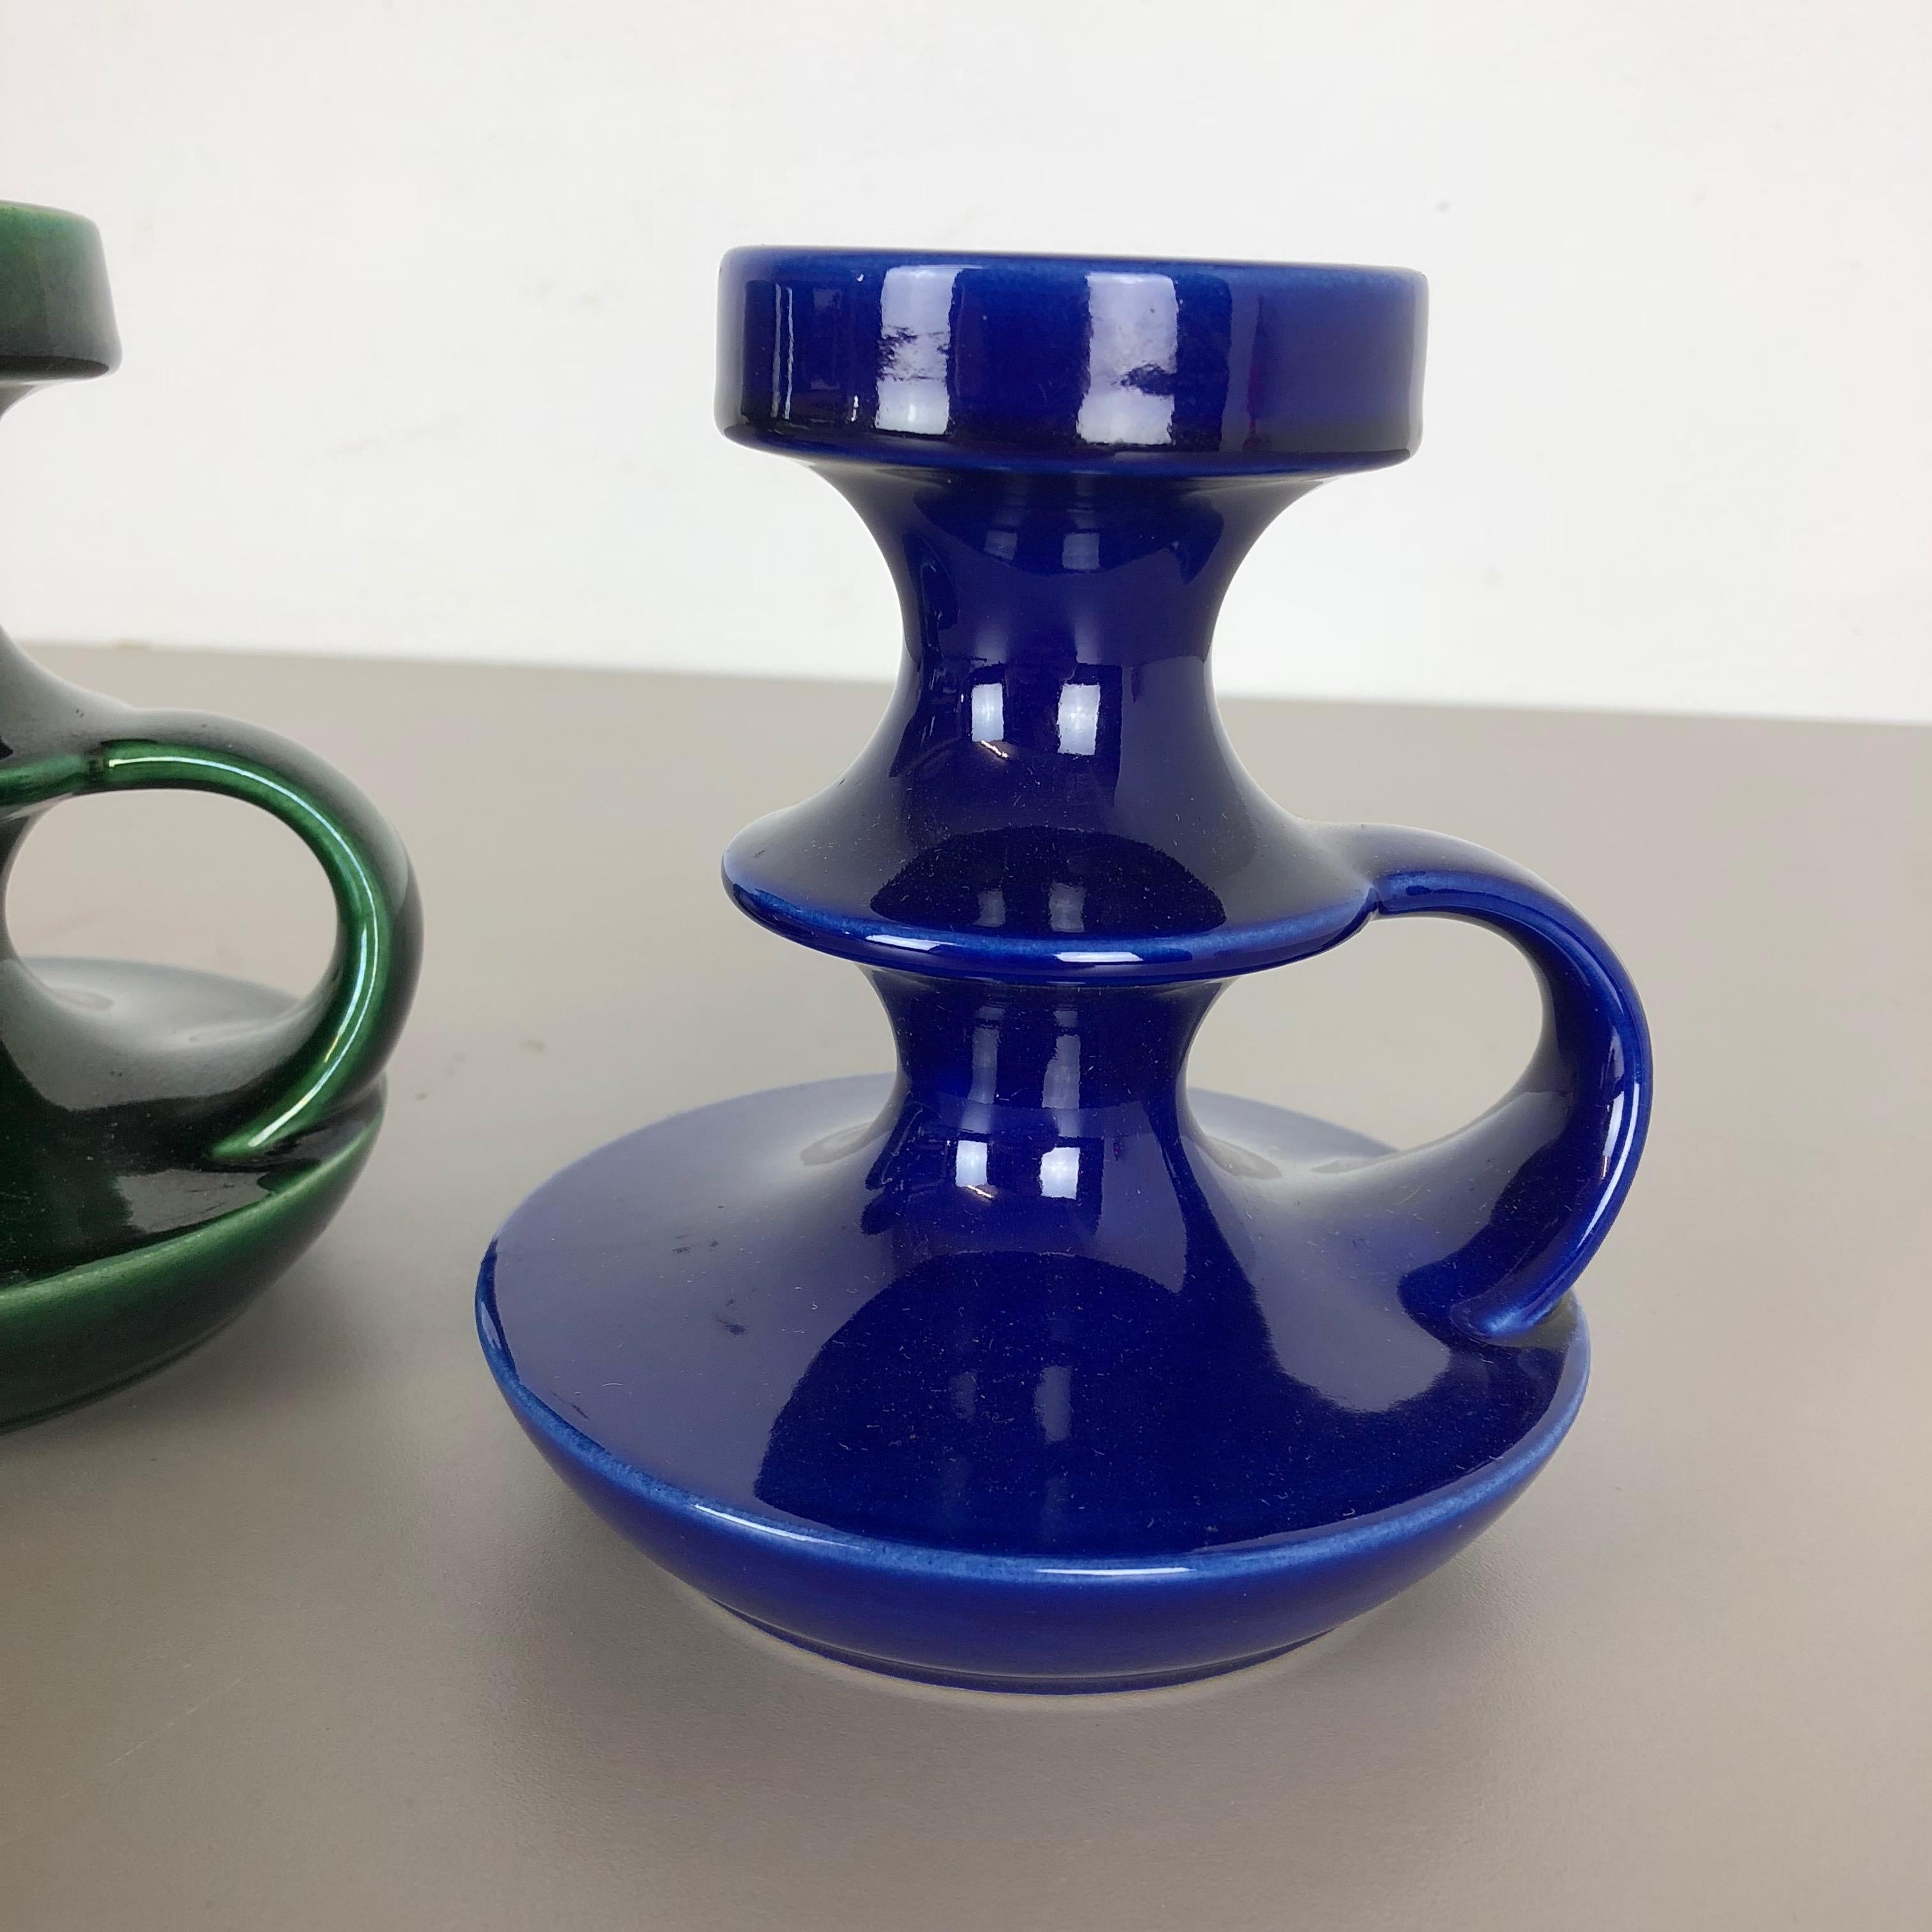 20th Century Set of Two Pottery Candleholder by Cari Zalloni for Steuler, Germany, 1970s